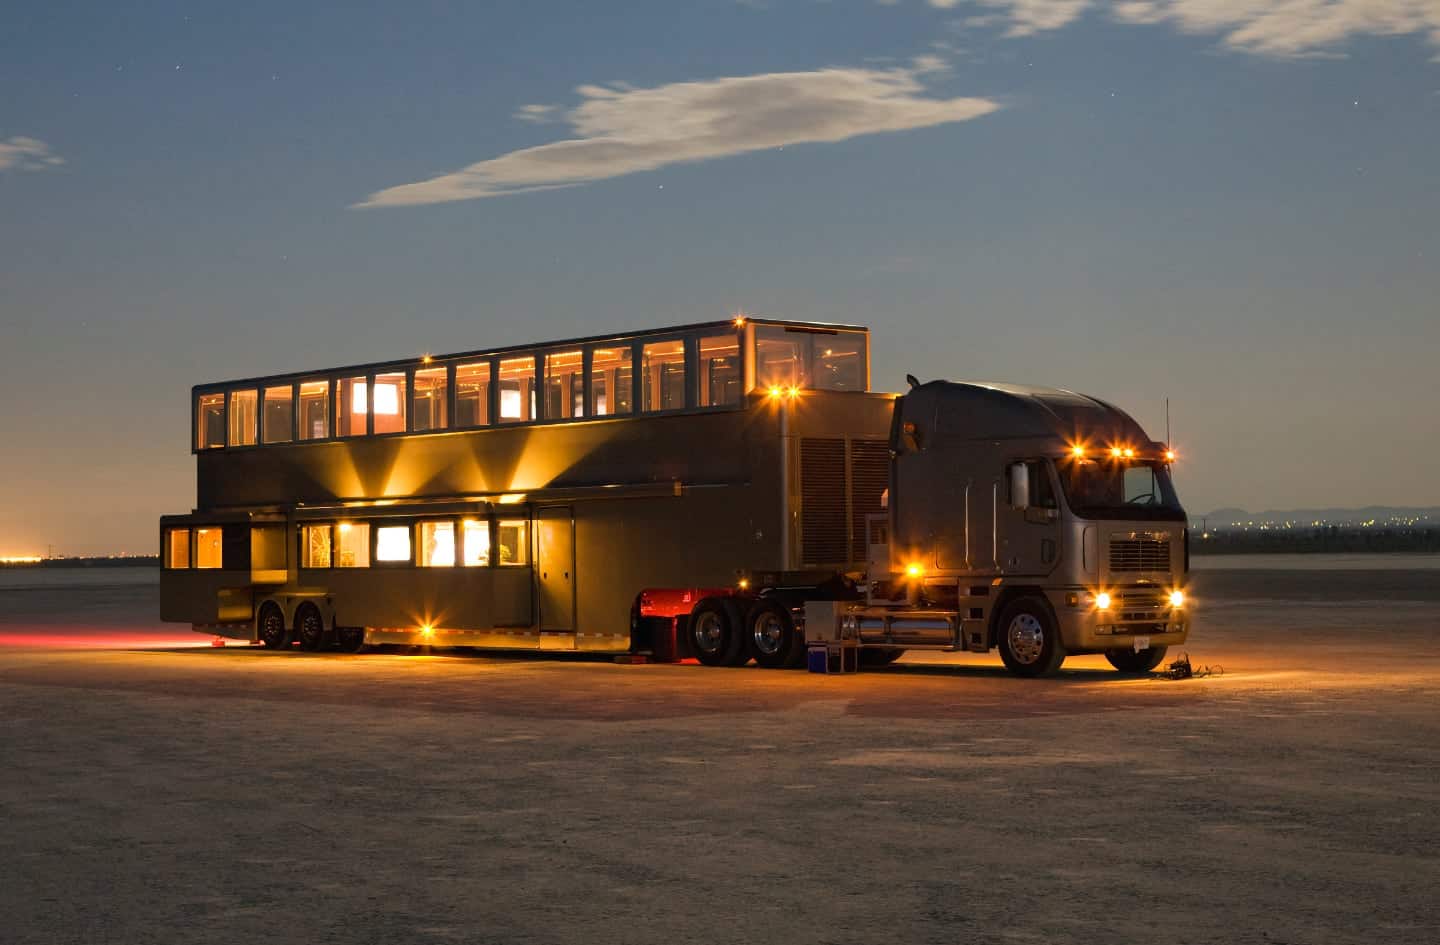 Top 12 Affordable & Small 5th Wheel Trailers